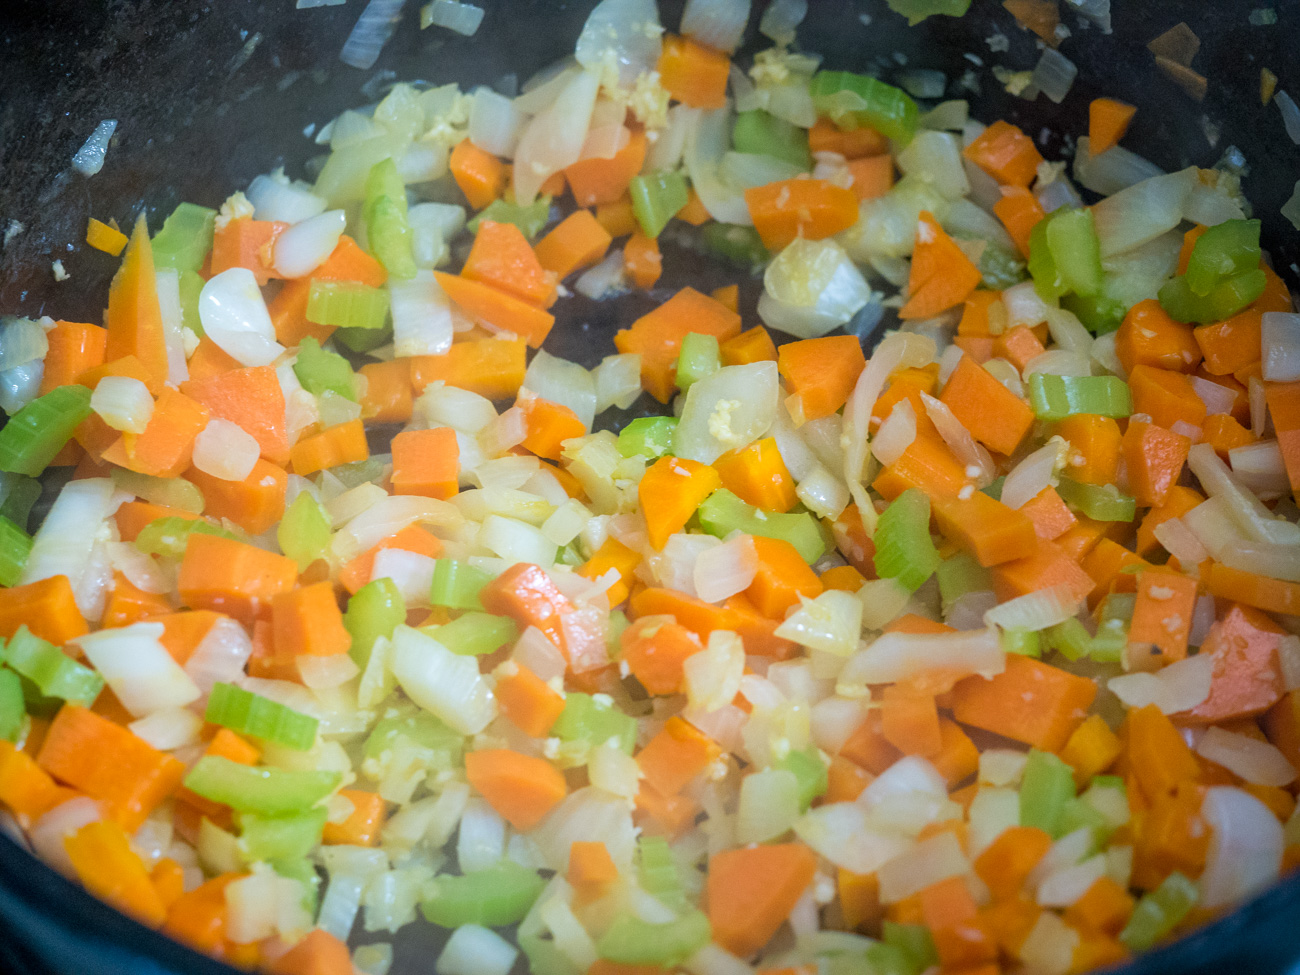 Heat the olive oil in a large Dutch oven over medium-high heat. Add onion, carrots, and celery and cook until softened, about 5 minutes. Add garlic and cook 1 minute more.